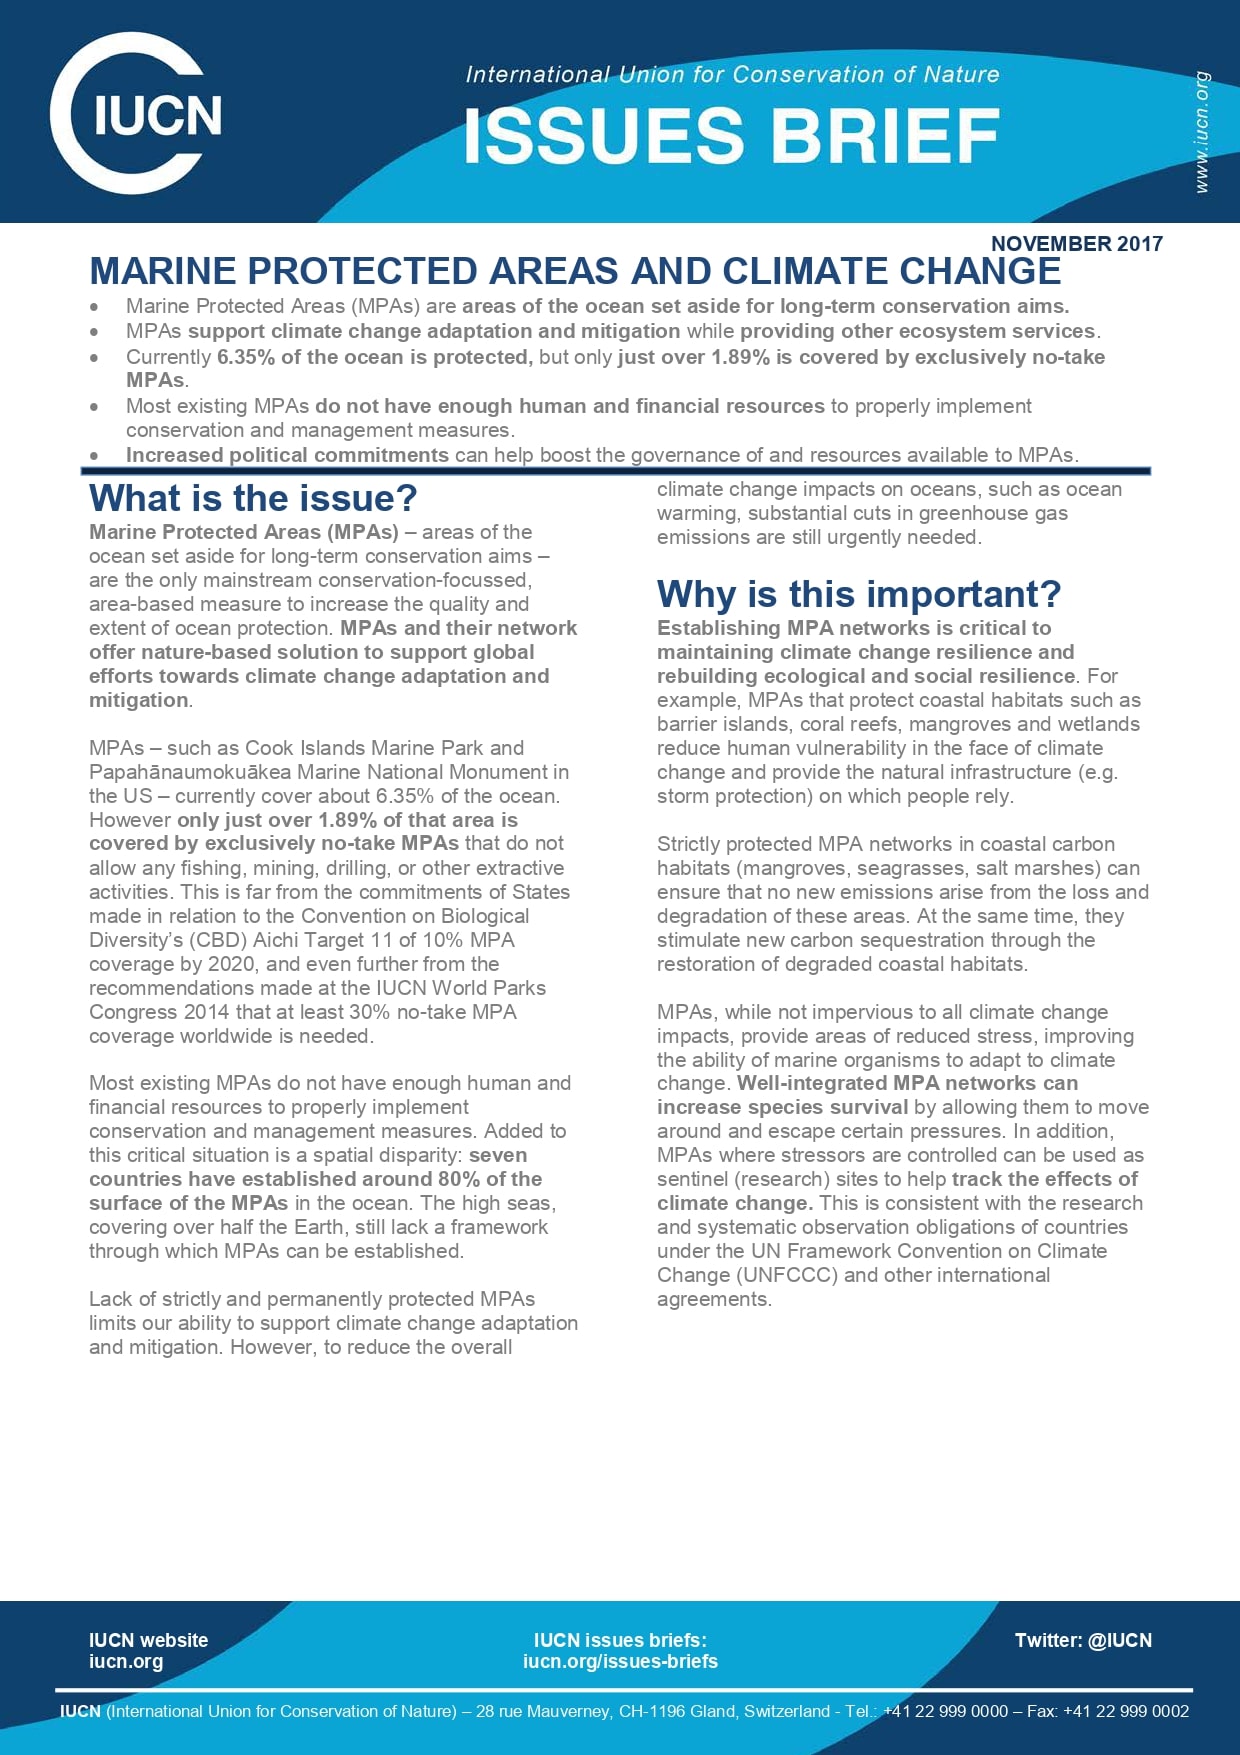 Marine protected areas and climate change